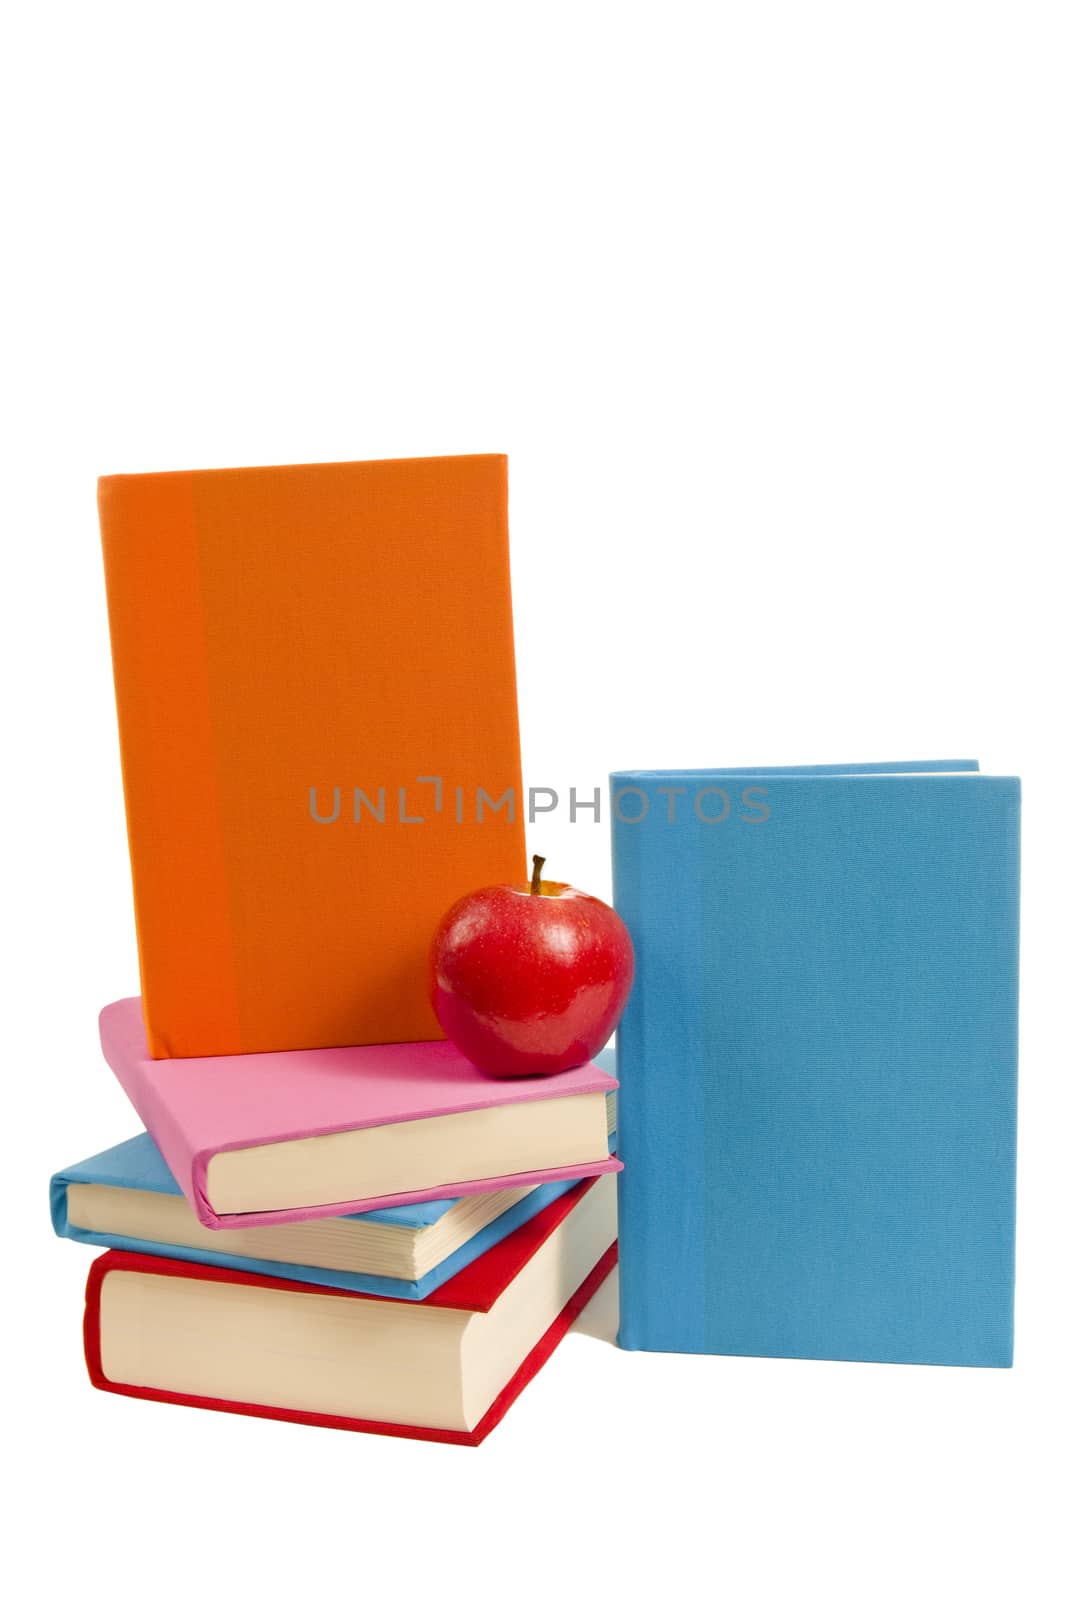 Covered Blank Books With Red Apple by stockbuster1